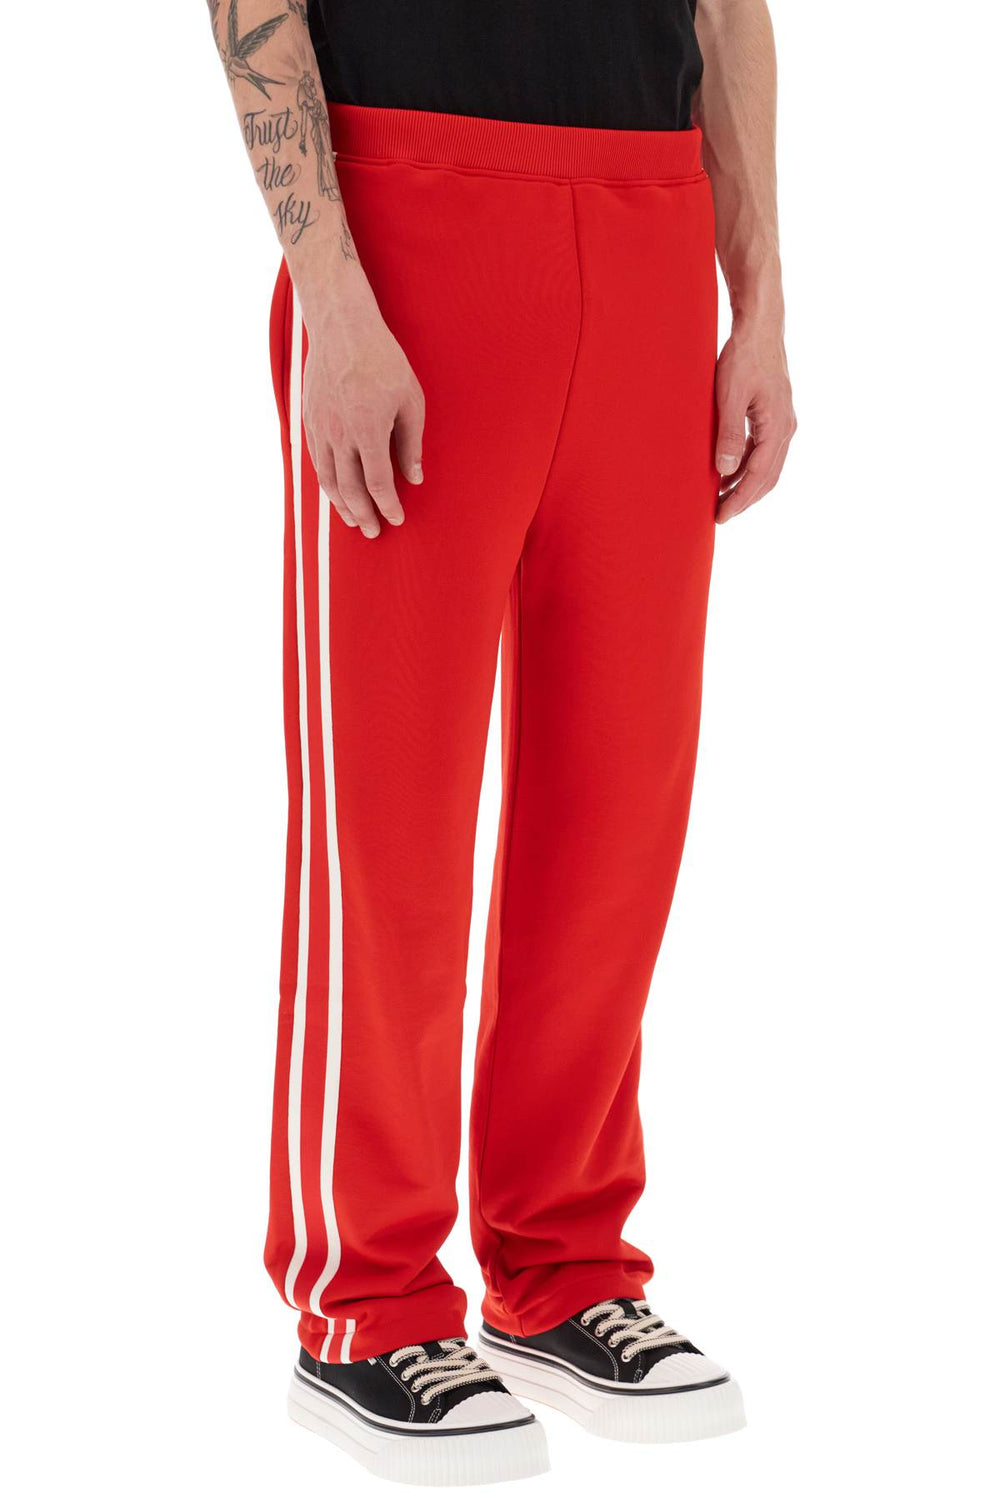 Ami paris track pants with side bands-1